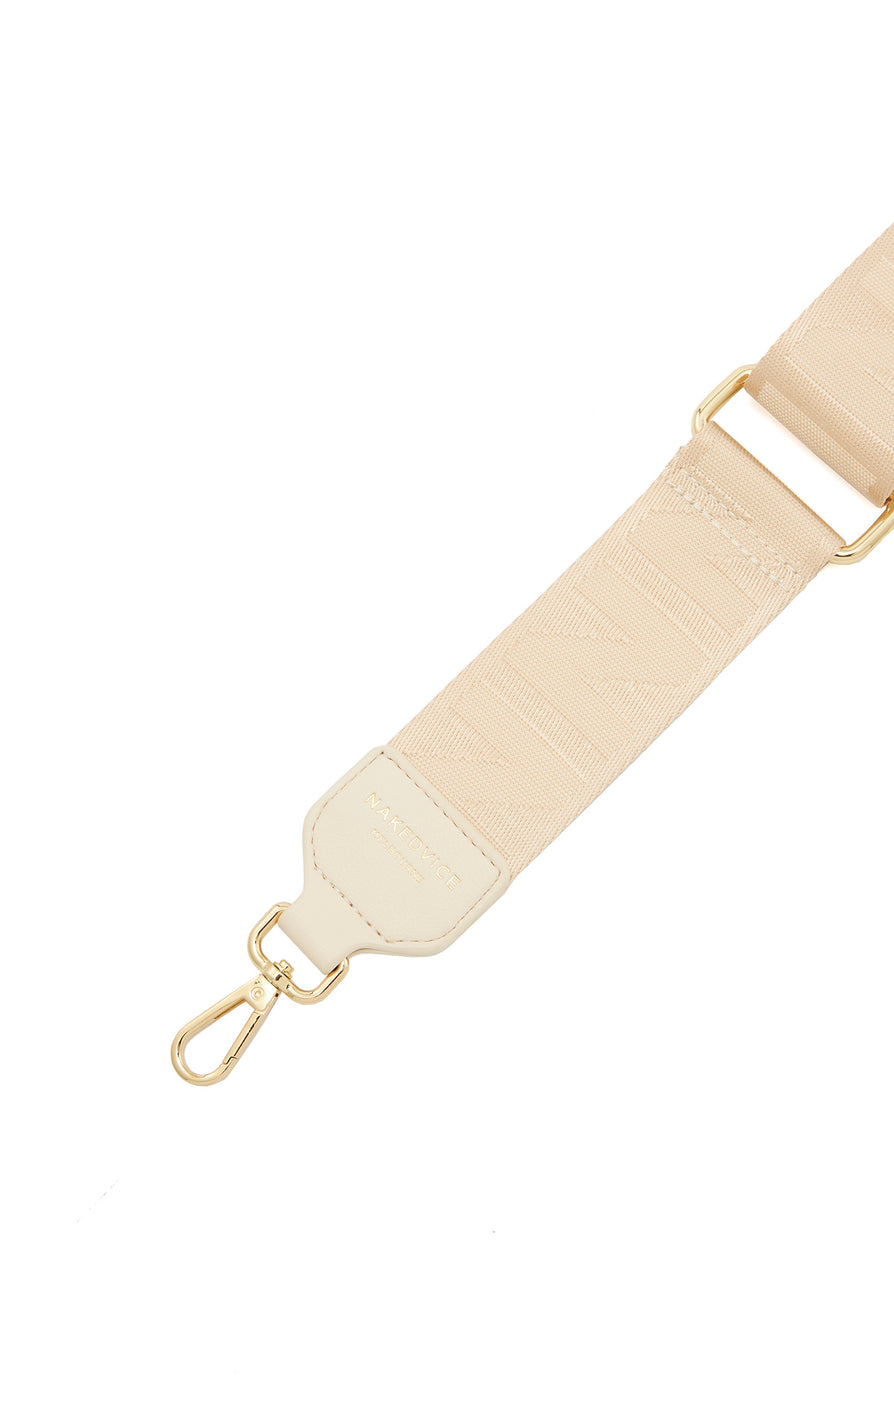 THE JUNO STRAP IVORY | ghost